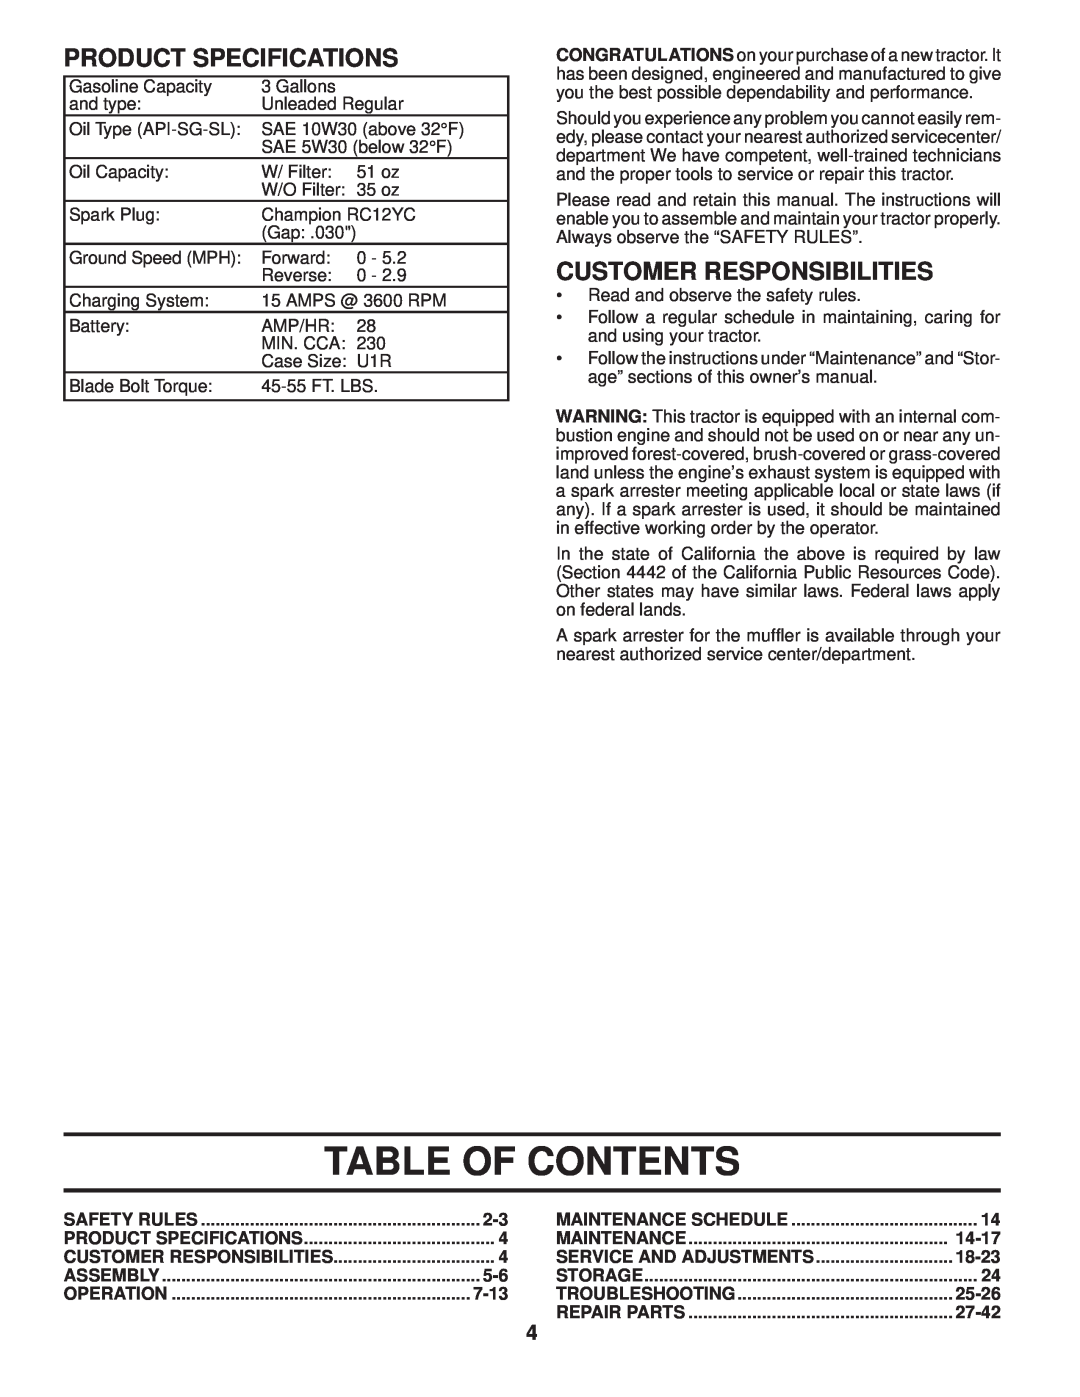 Husqvarna 960430120 owner manual Table Of Contents, Product Specifications, Customer Responsibilities 